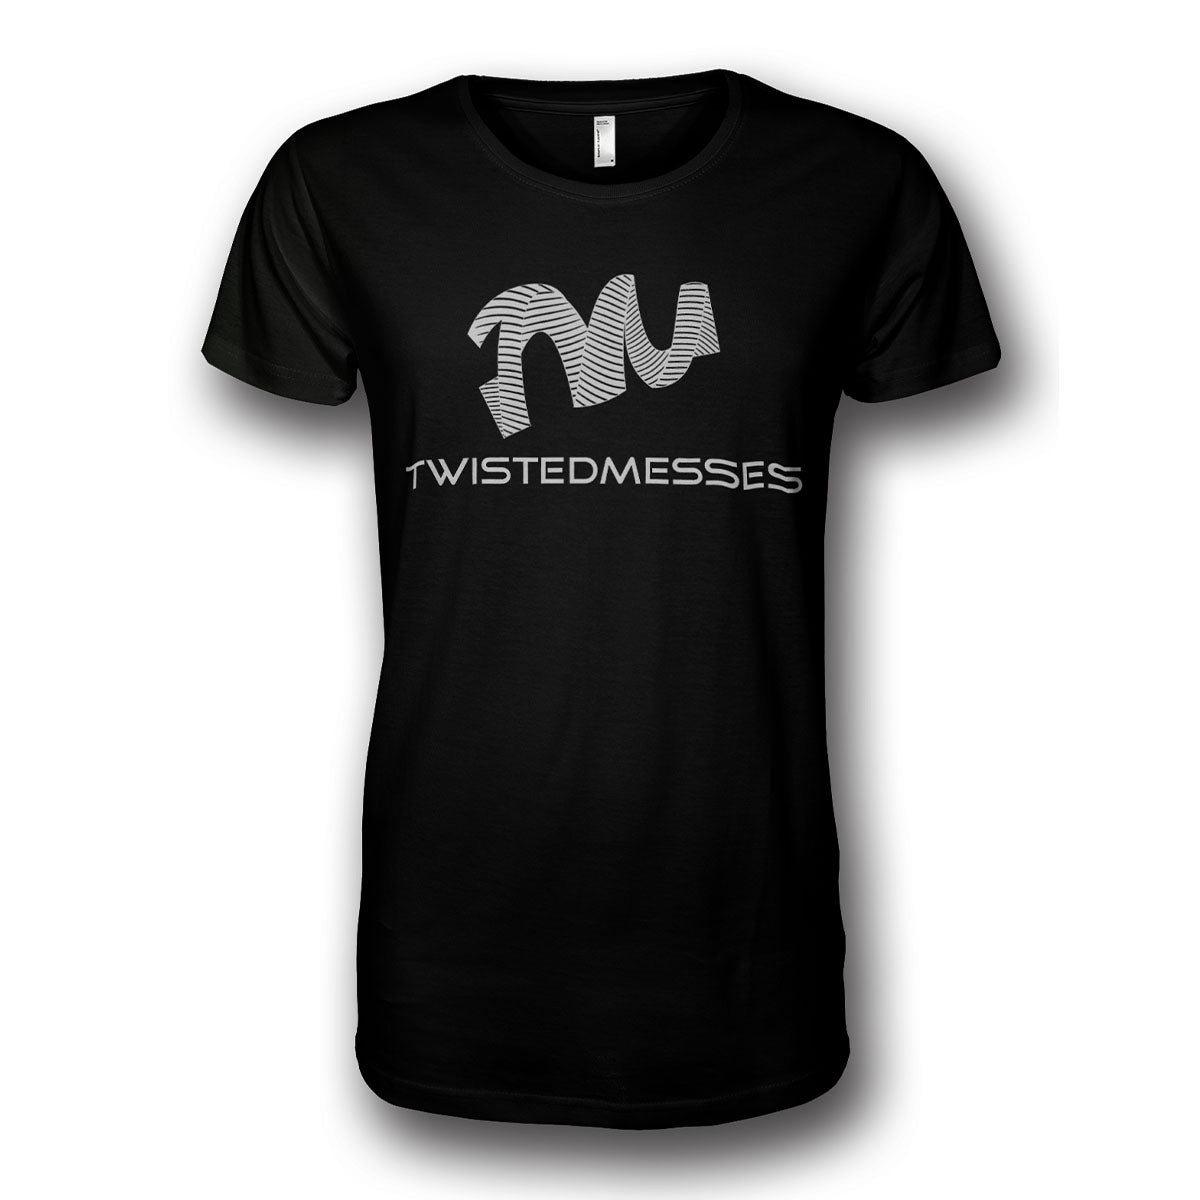 T-Shirt Black/White by Twisted Messes